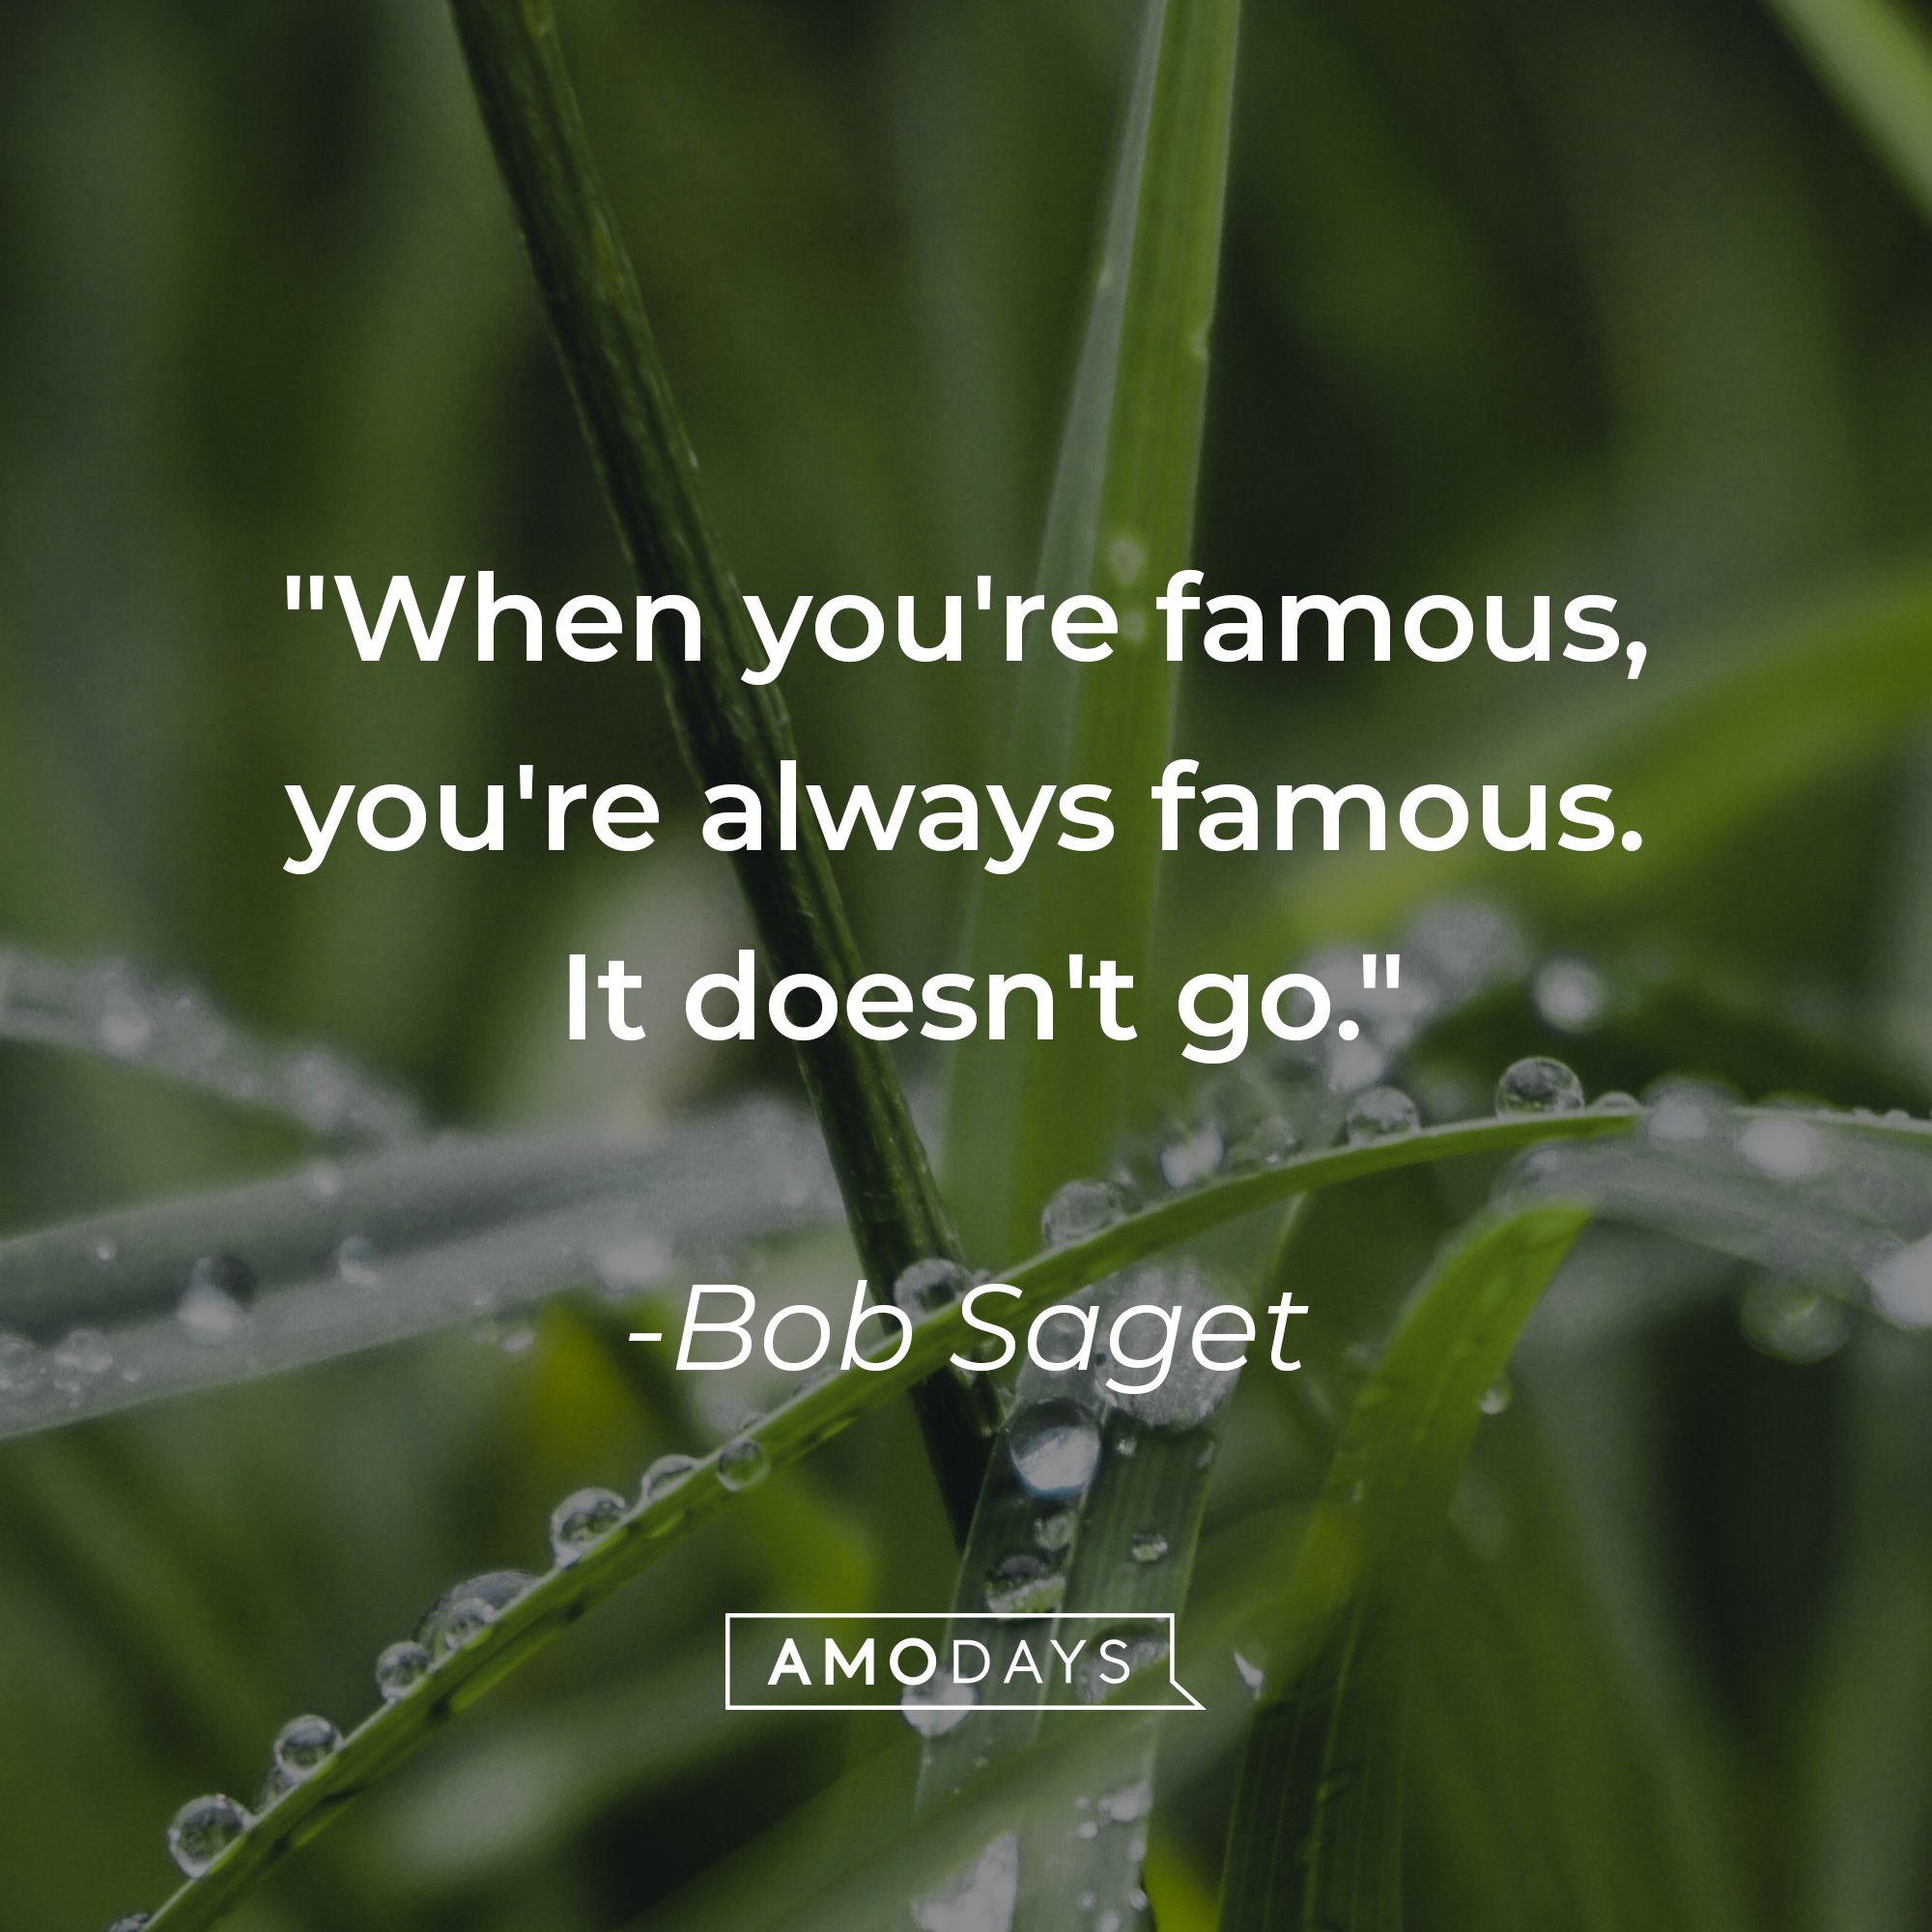  Bob Saget’s quote: "When you're famous, you're always famous. It doesn't go."  | Image: AmoDays